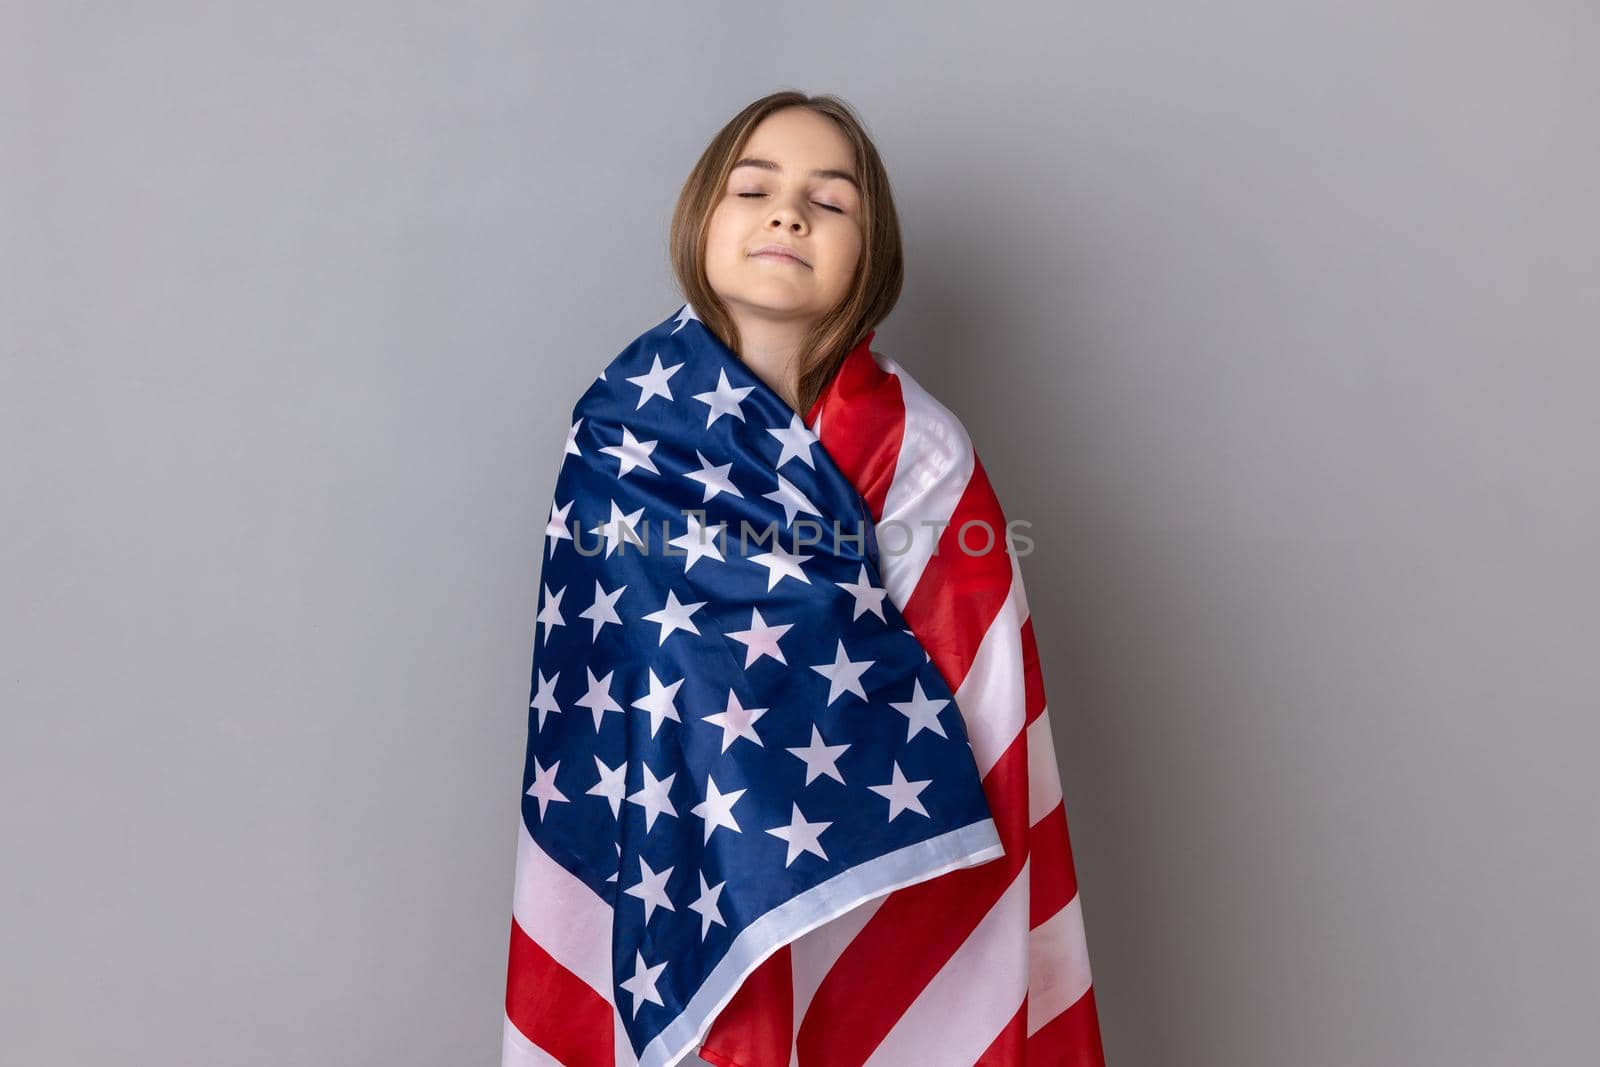 Patriotic little girl standing wrapped in american flag, keeping eyes closed, relocating to America. by Khosro1